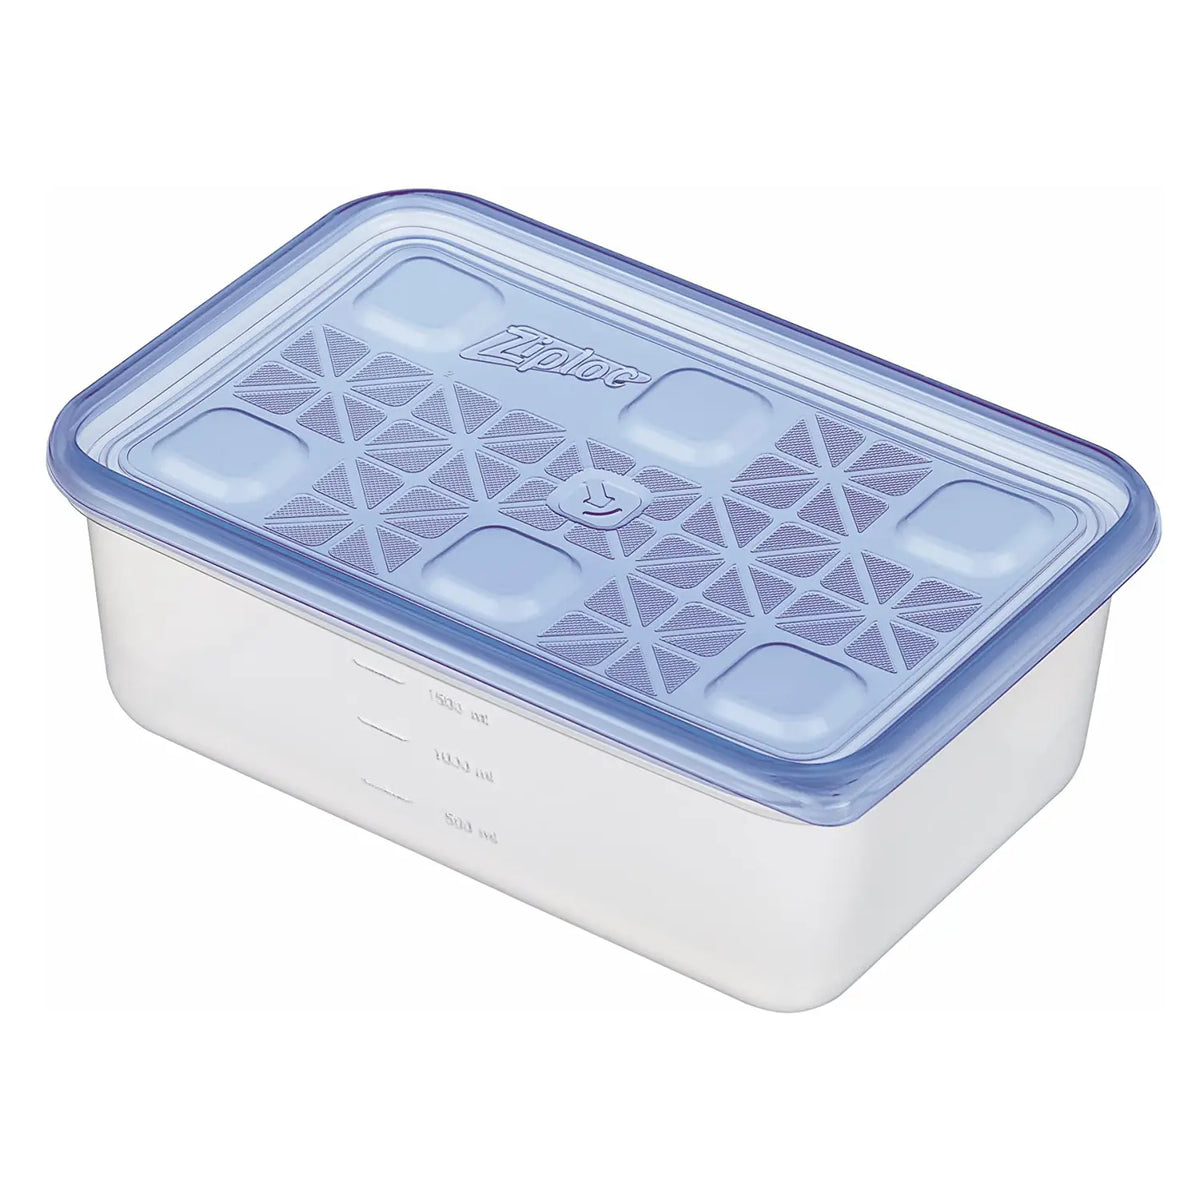 iswas - Microwavable Airtight Silicone Food Container (1100ml